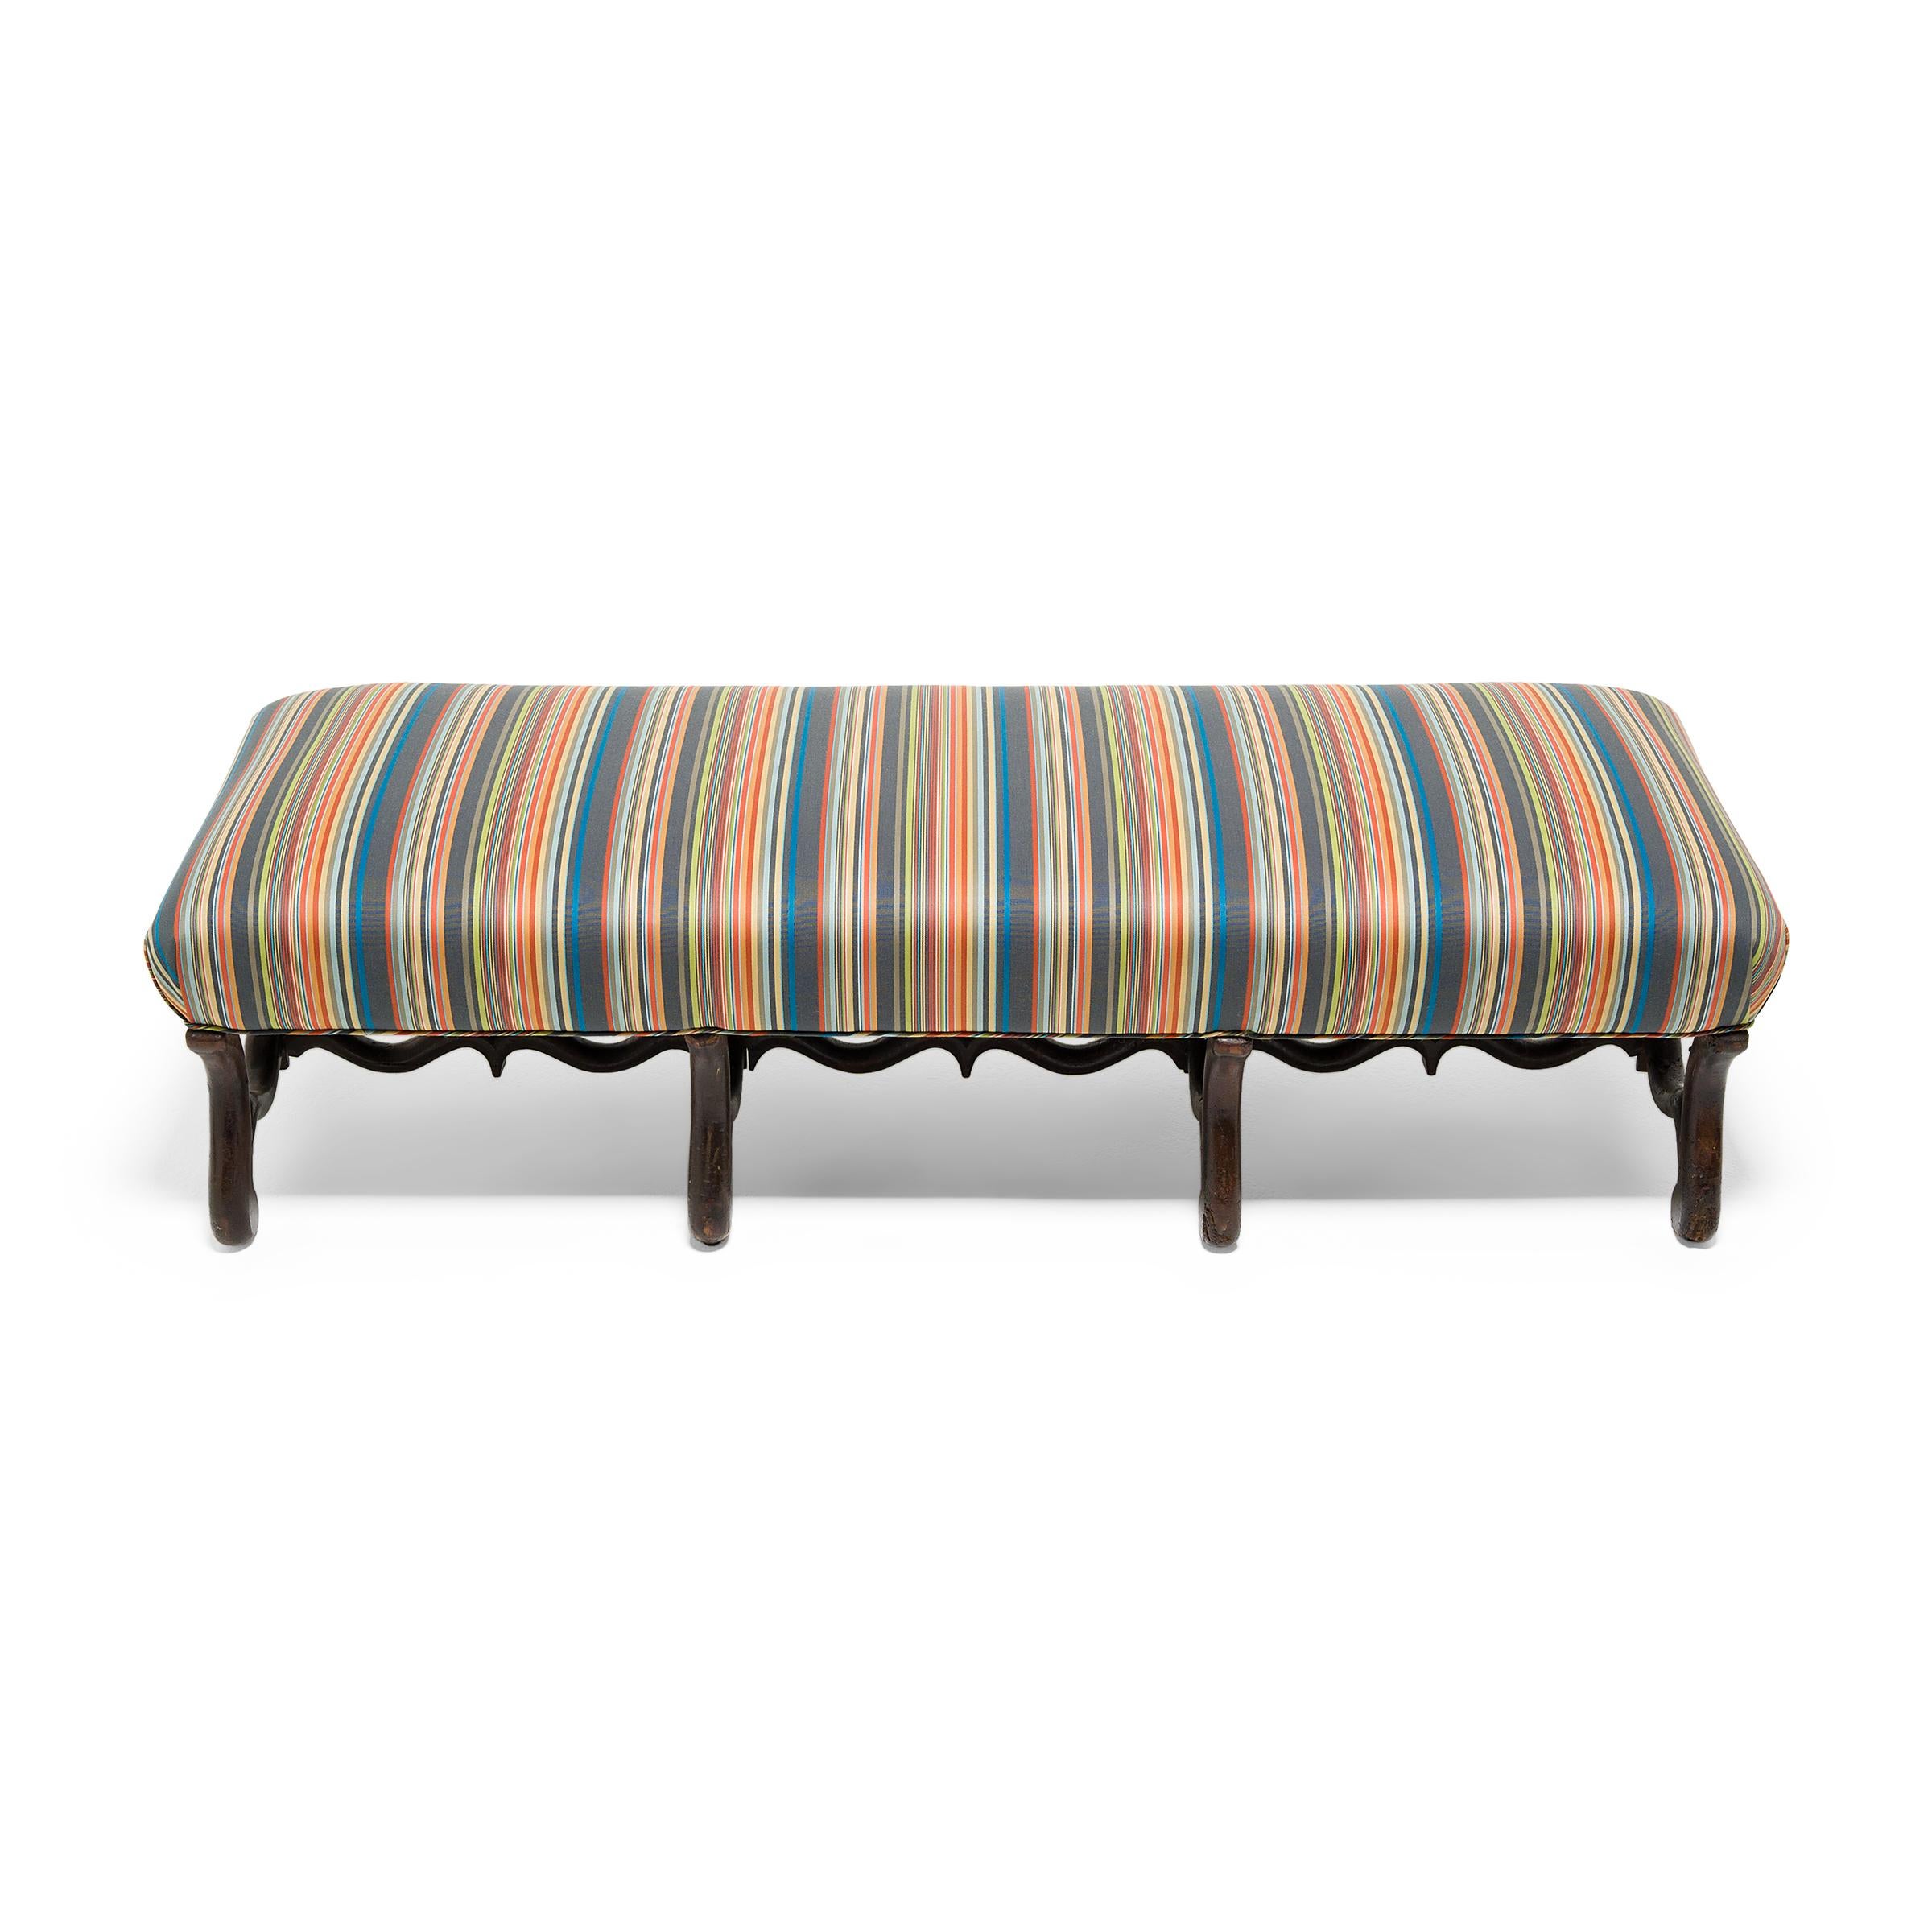 French Long Upholstered Os de Mouton Bench, c. 1800 For Sale